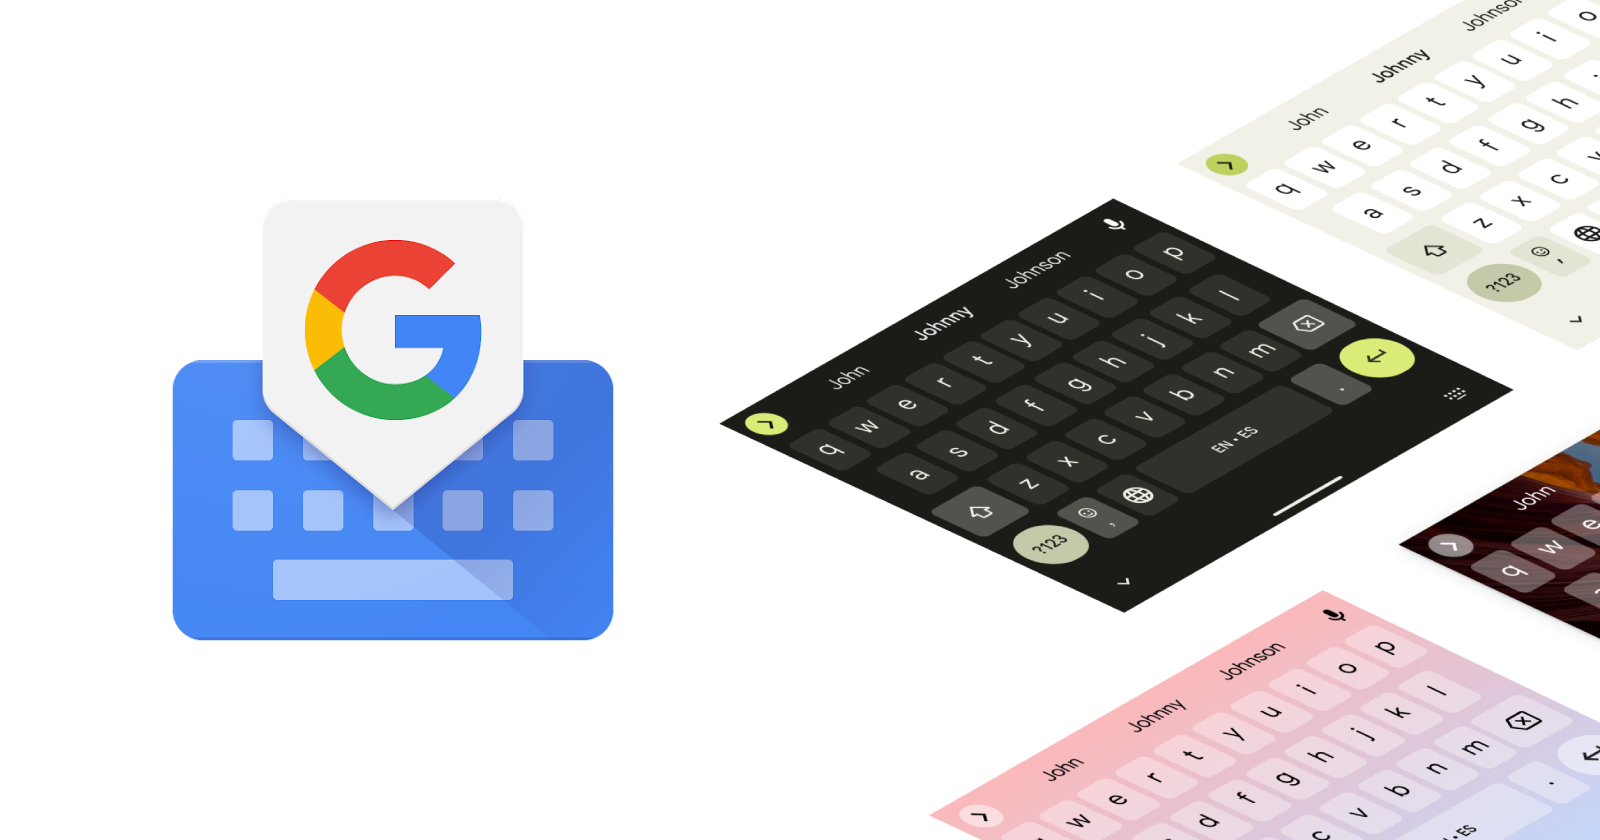 Gboard update brings better landscape mode typing experience